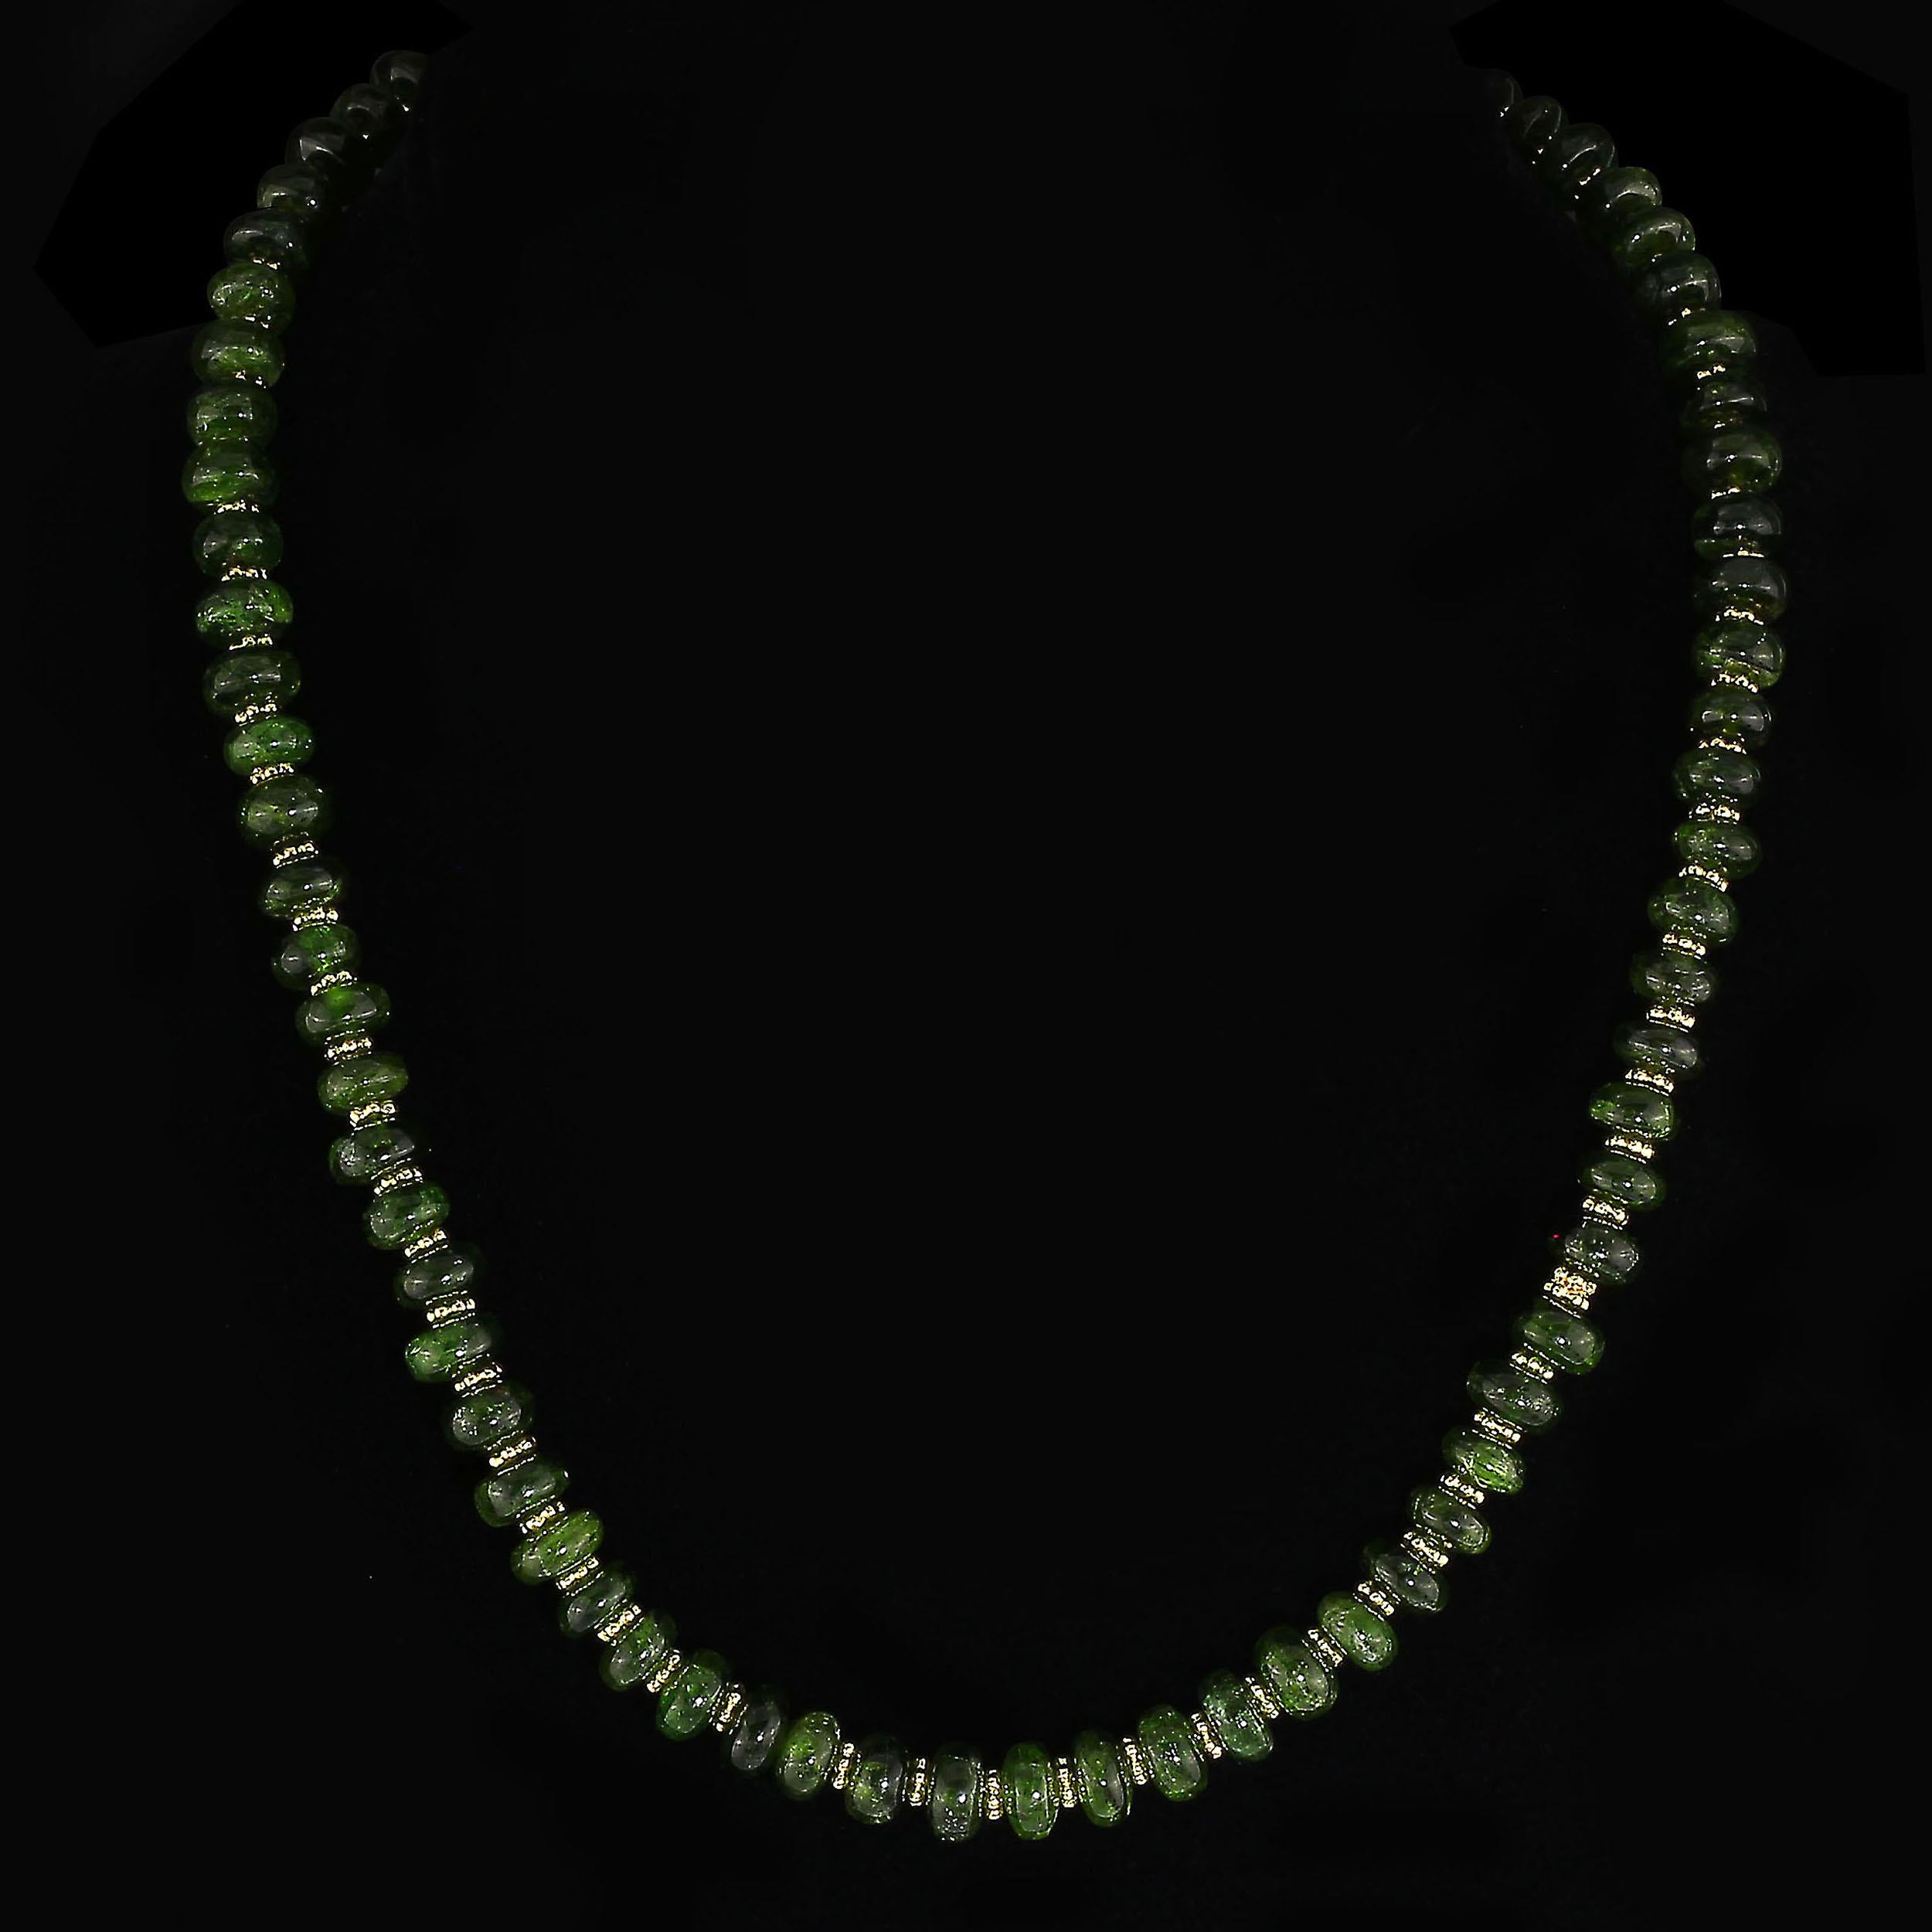 Artisan Gemjunky Sparkling Chrome Diopside Necklace with Goldy Accents